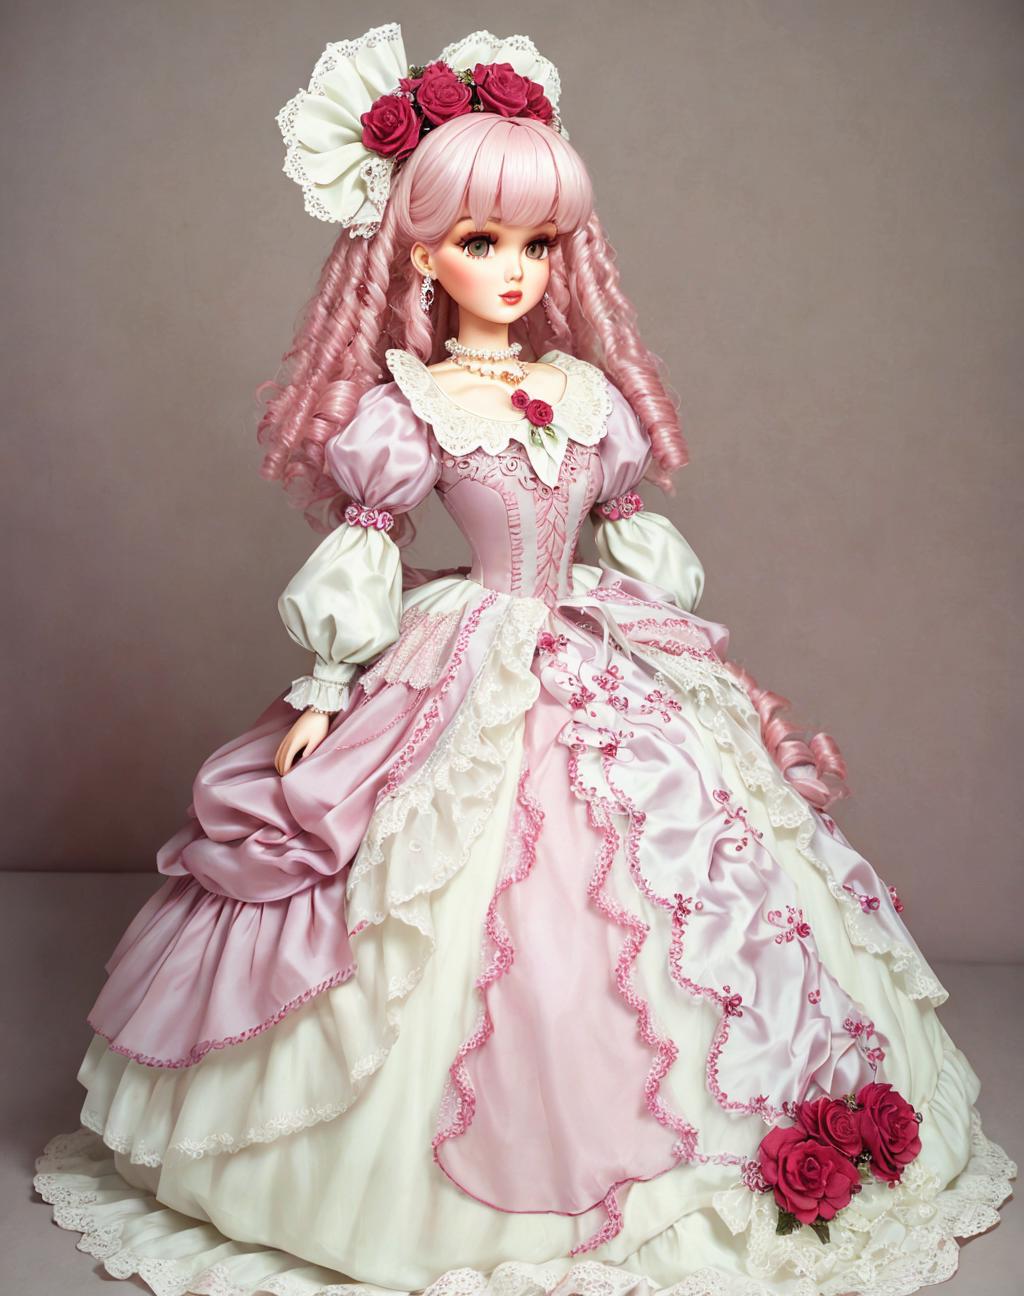 Bisque Dolls - by EDG image by EDG